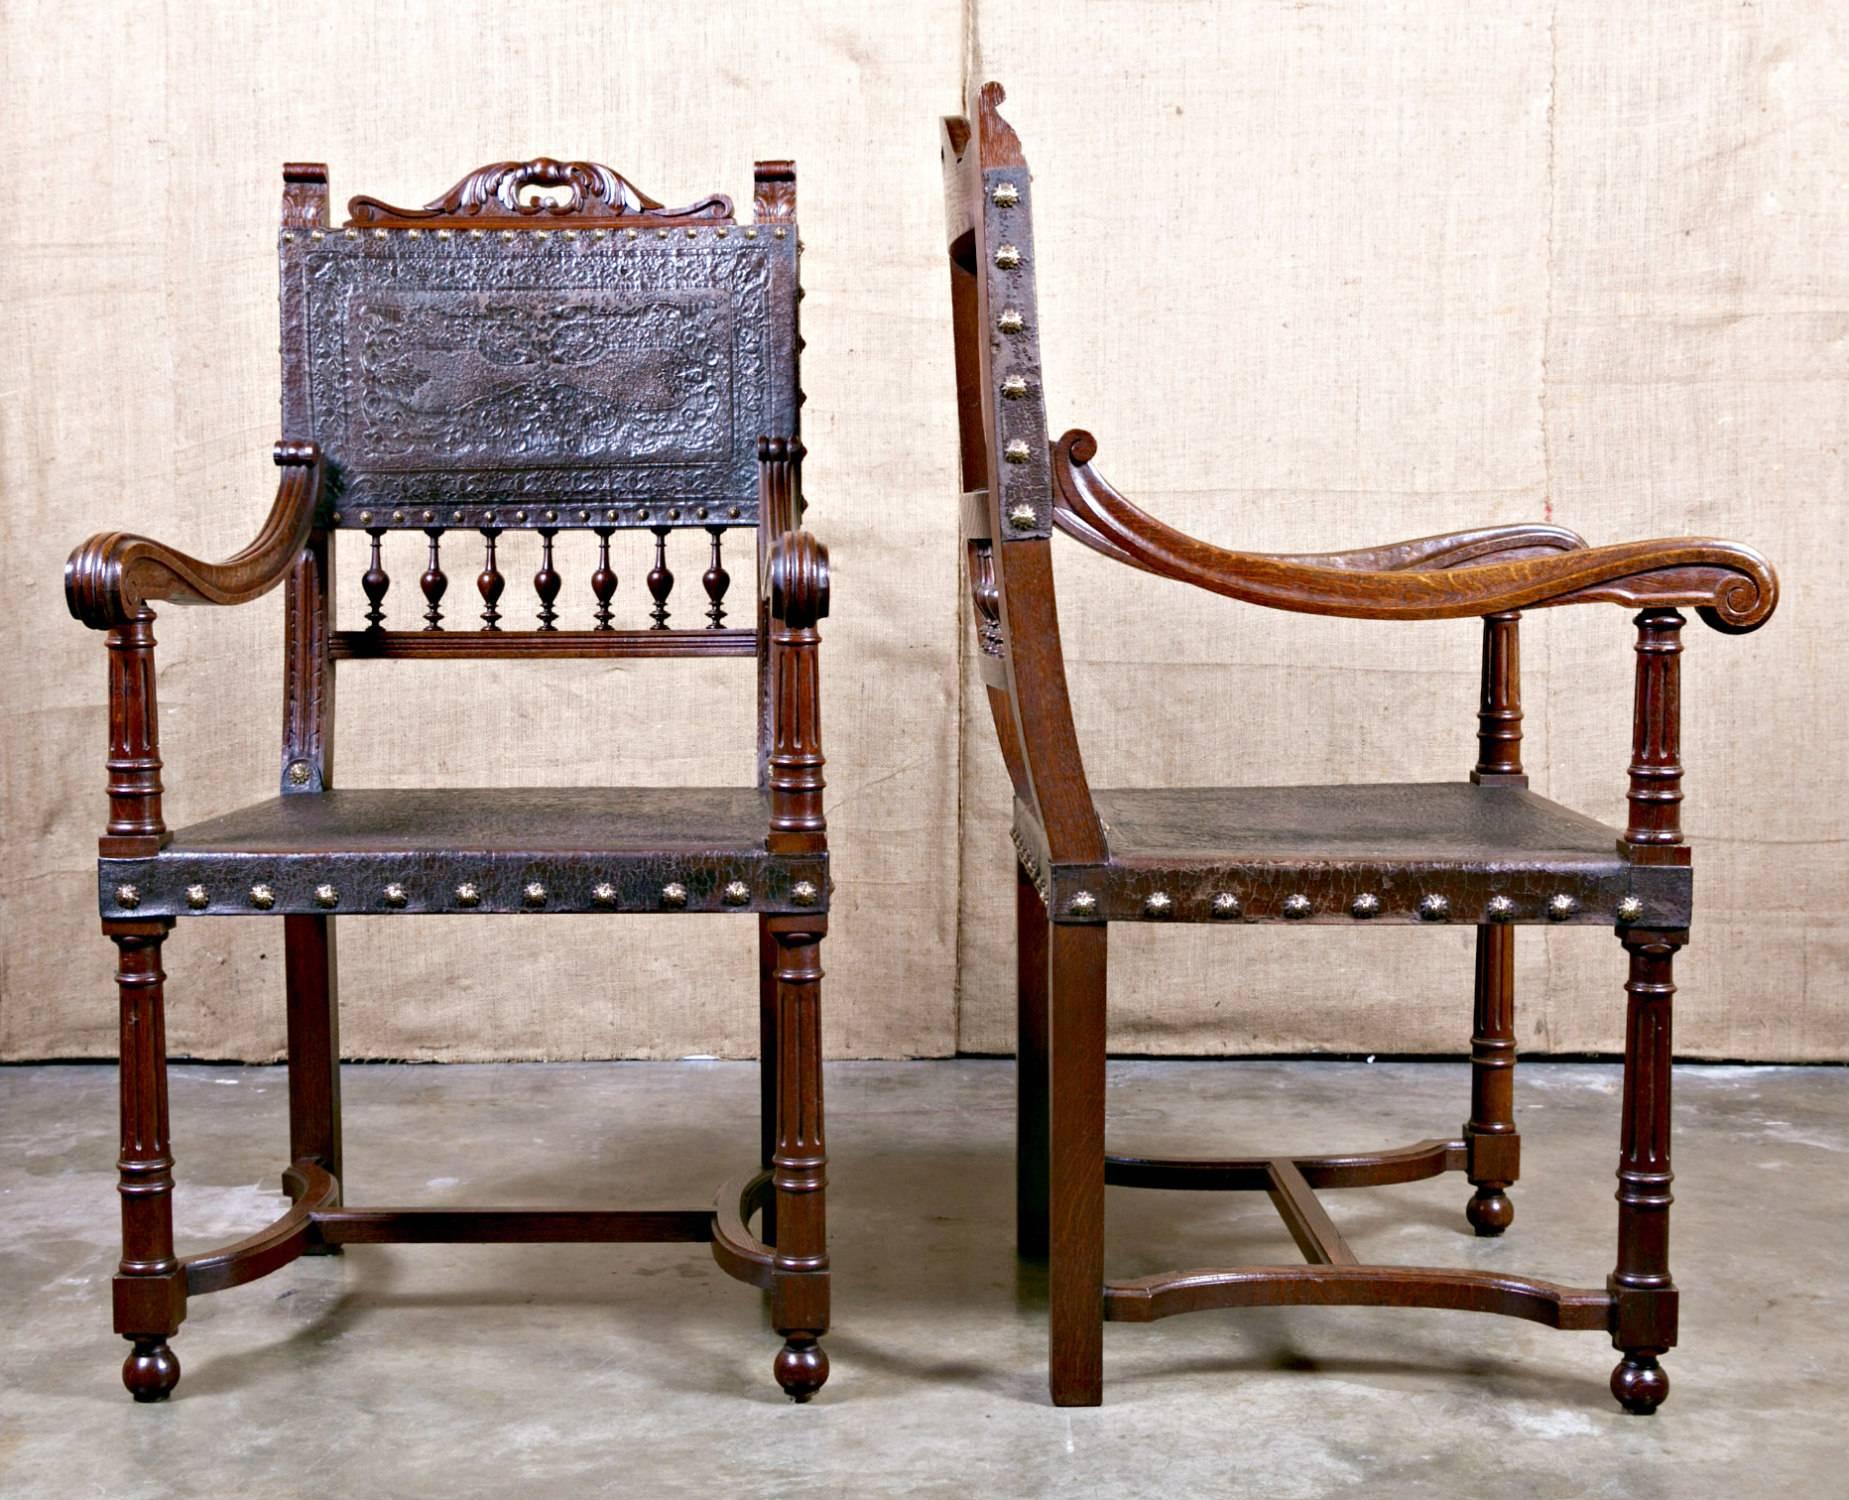 Pair of mid-19th century French Renaissance Henri II fauteuils from a chateau in the Loire valley, having hand-carved walnut frames with original hand tooled leather seats and backs with brass nailhead trim. Chairs are solid and very sturdy and